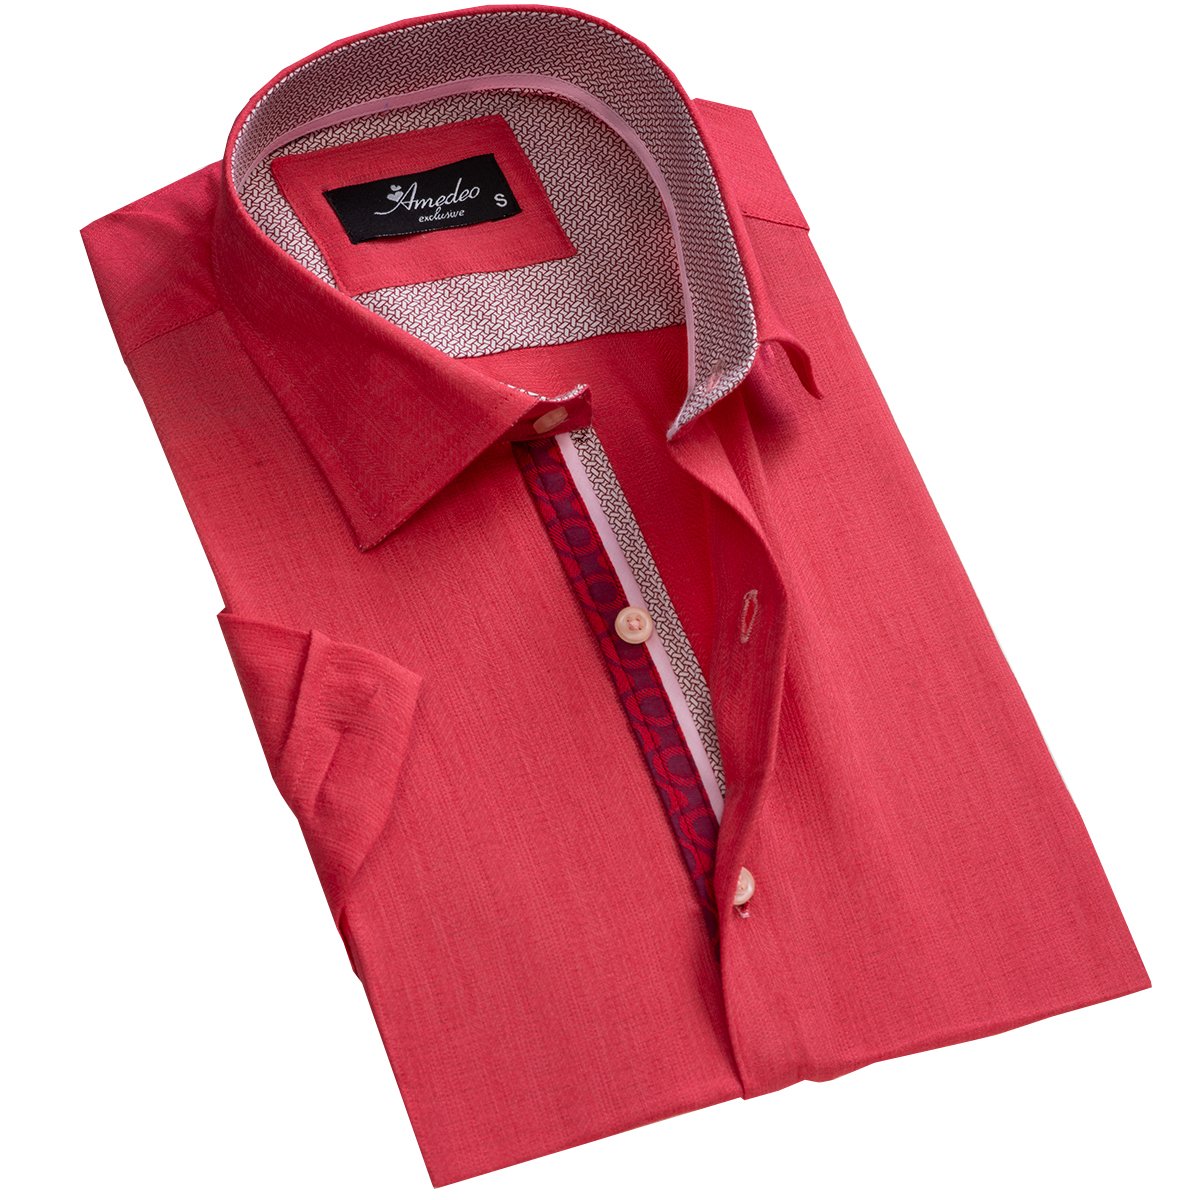 Solid Bright Red Men's Short Sleeve Button up Shirts - Tailored Slim